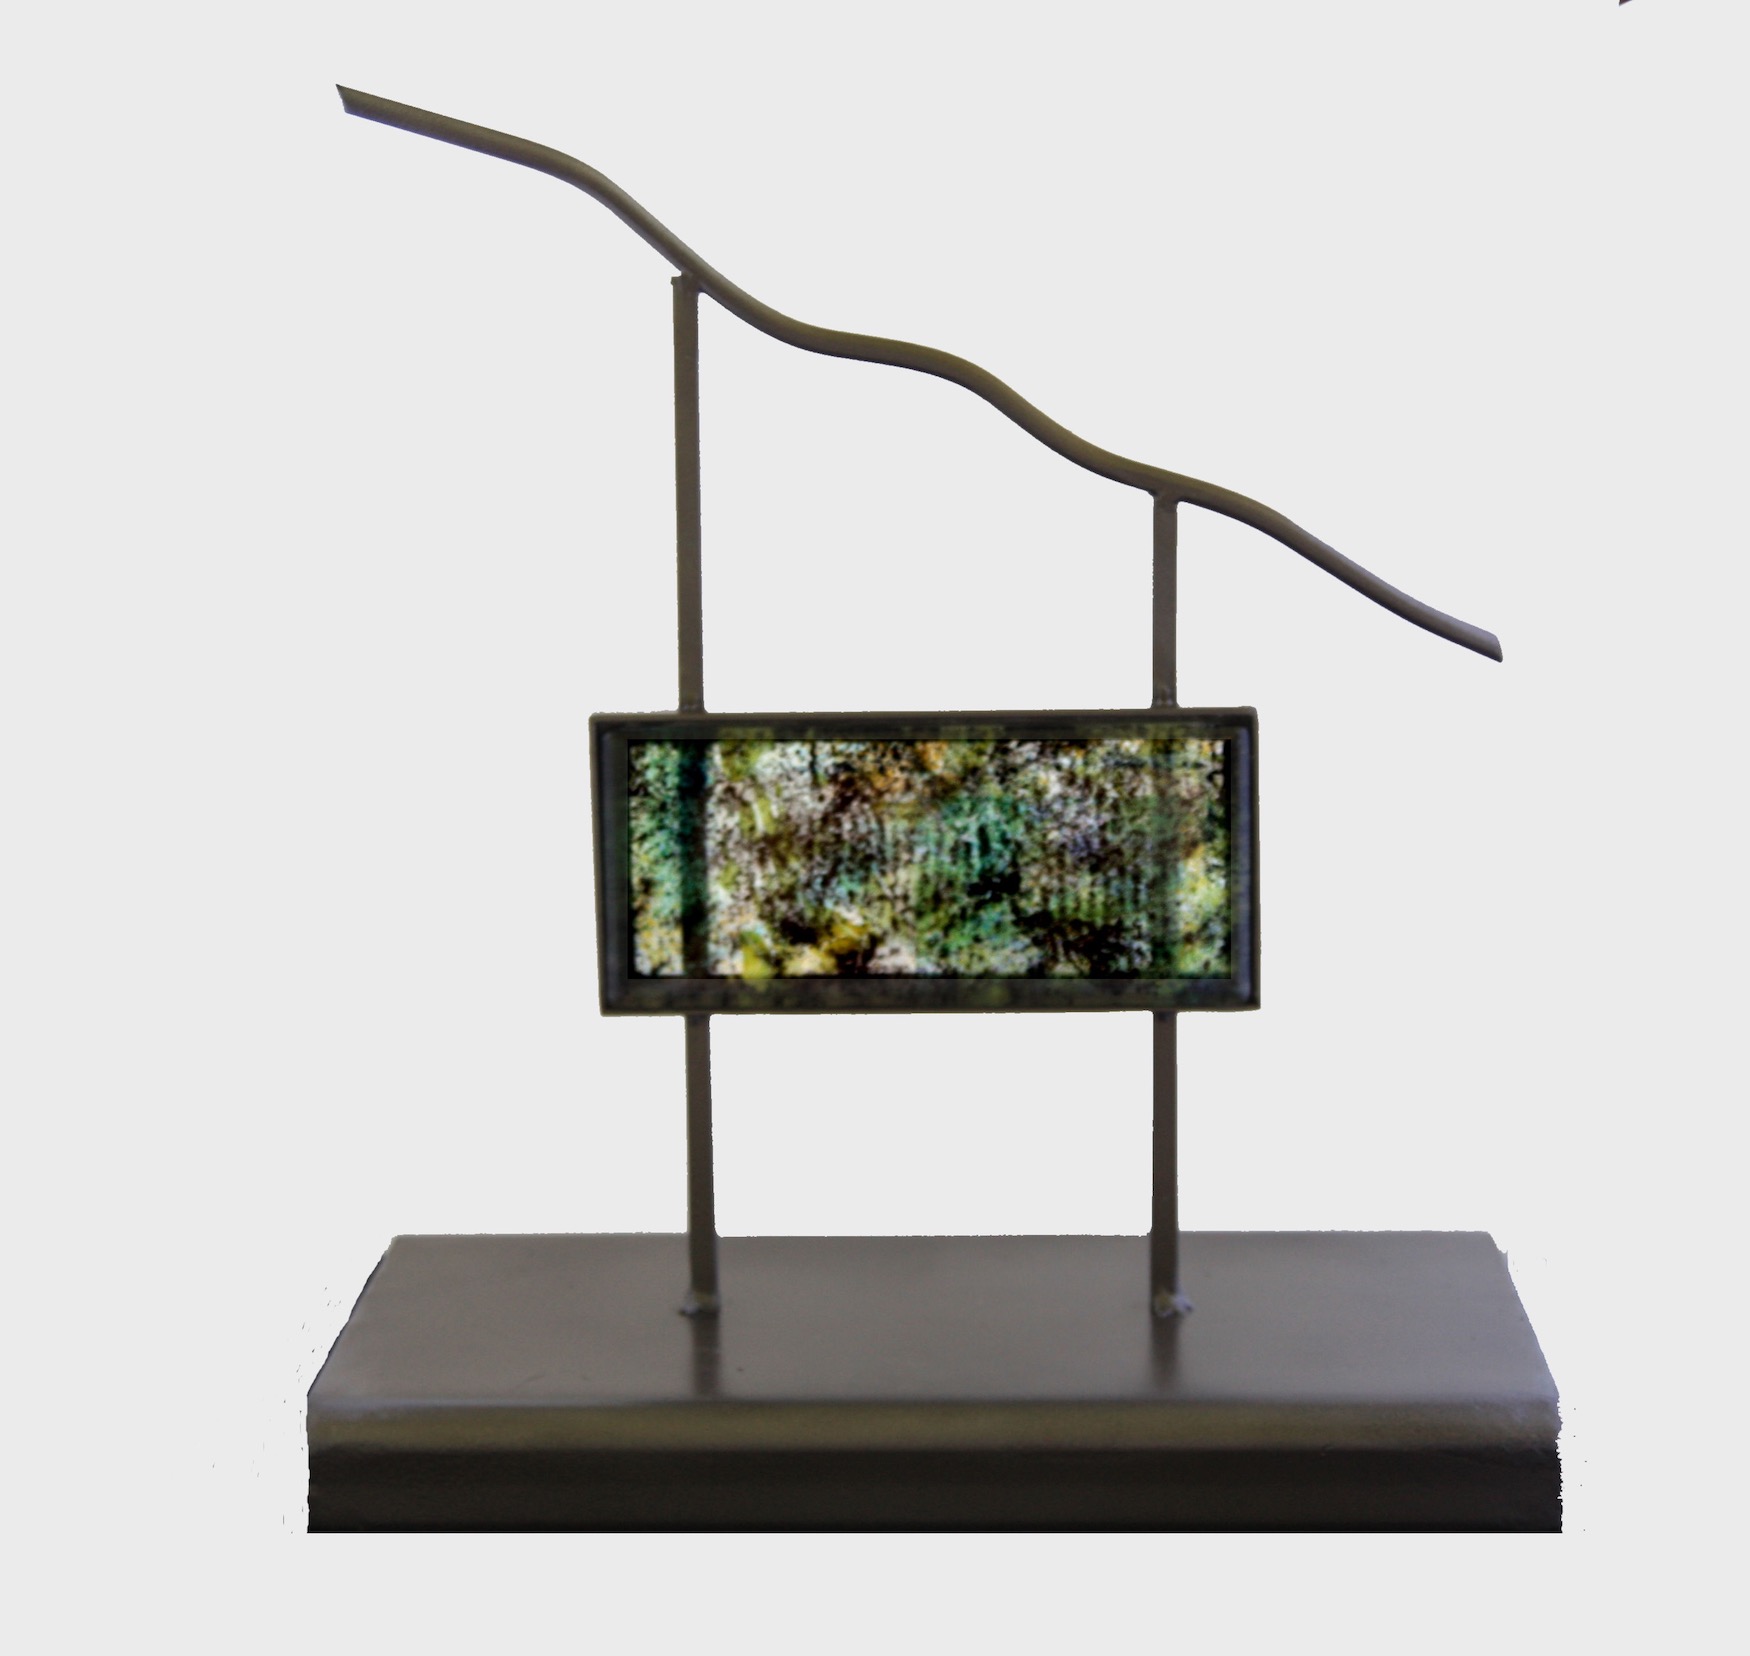 Sculpture - Below the Surface. Appx. 2' height. 3/4" thick fused glass on metal.